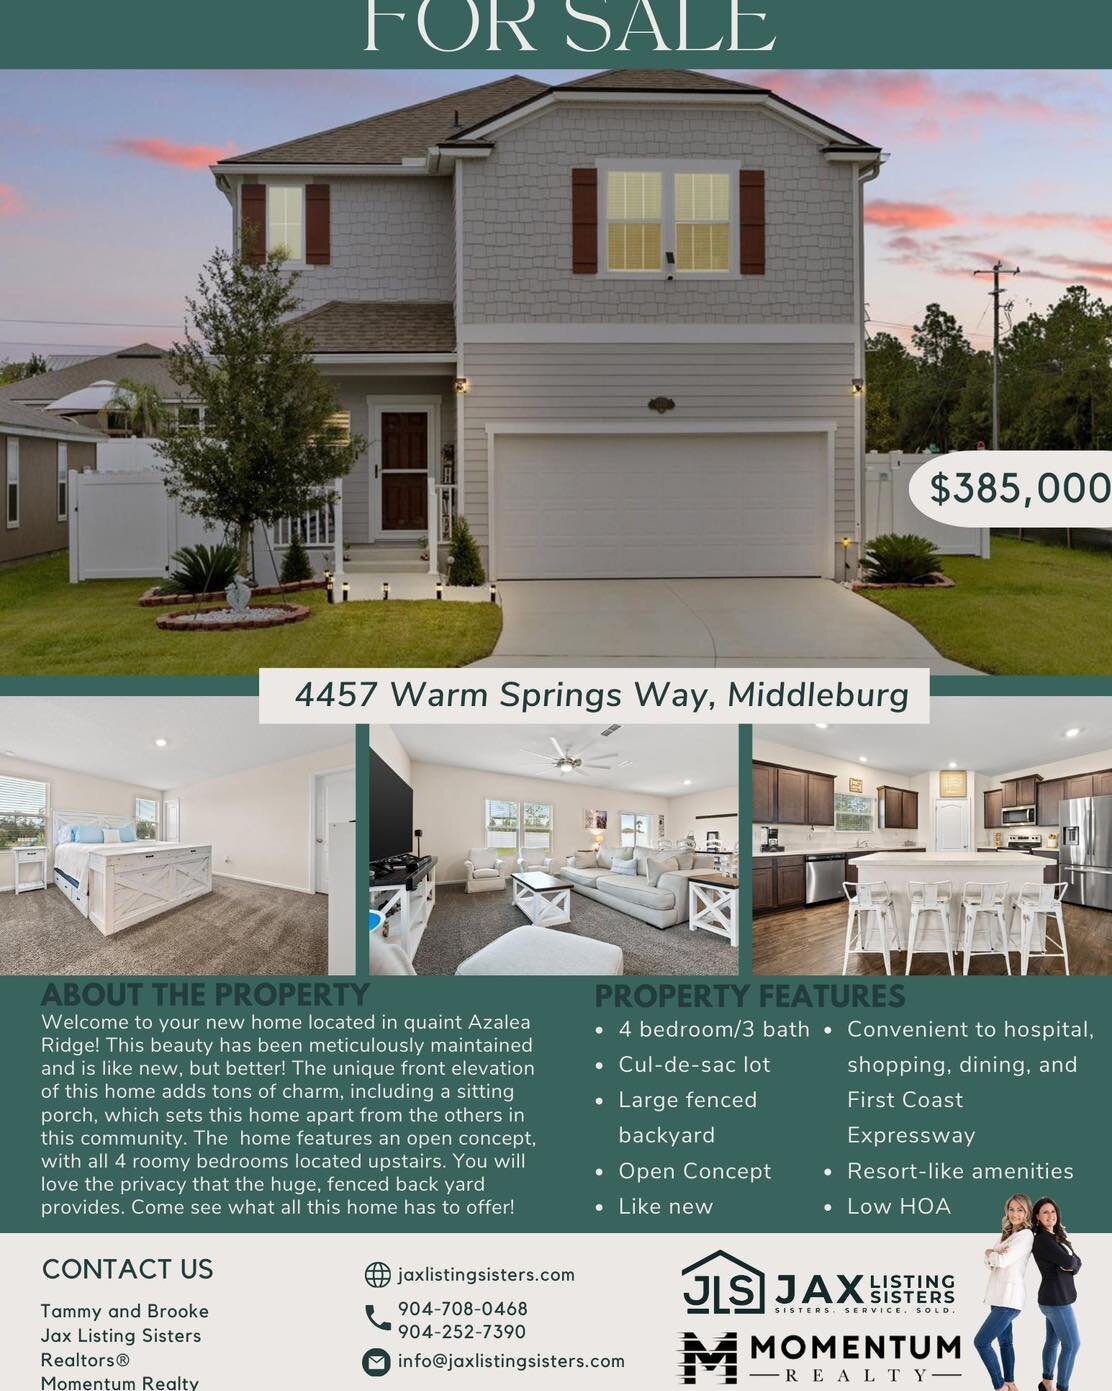 Don&rsquo;t miss the opportunity to see this beauty in person. Call us for a showing!

Brooke Hewitt - 904.252.7390
Tammy Baranowski - 904.709.0468